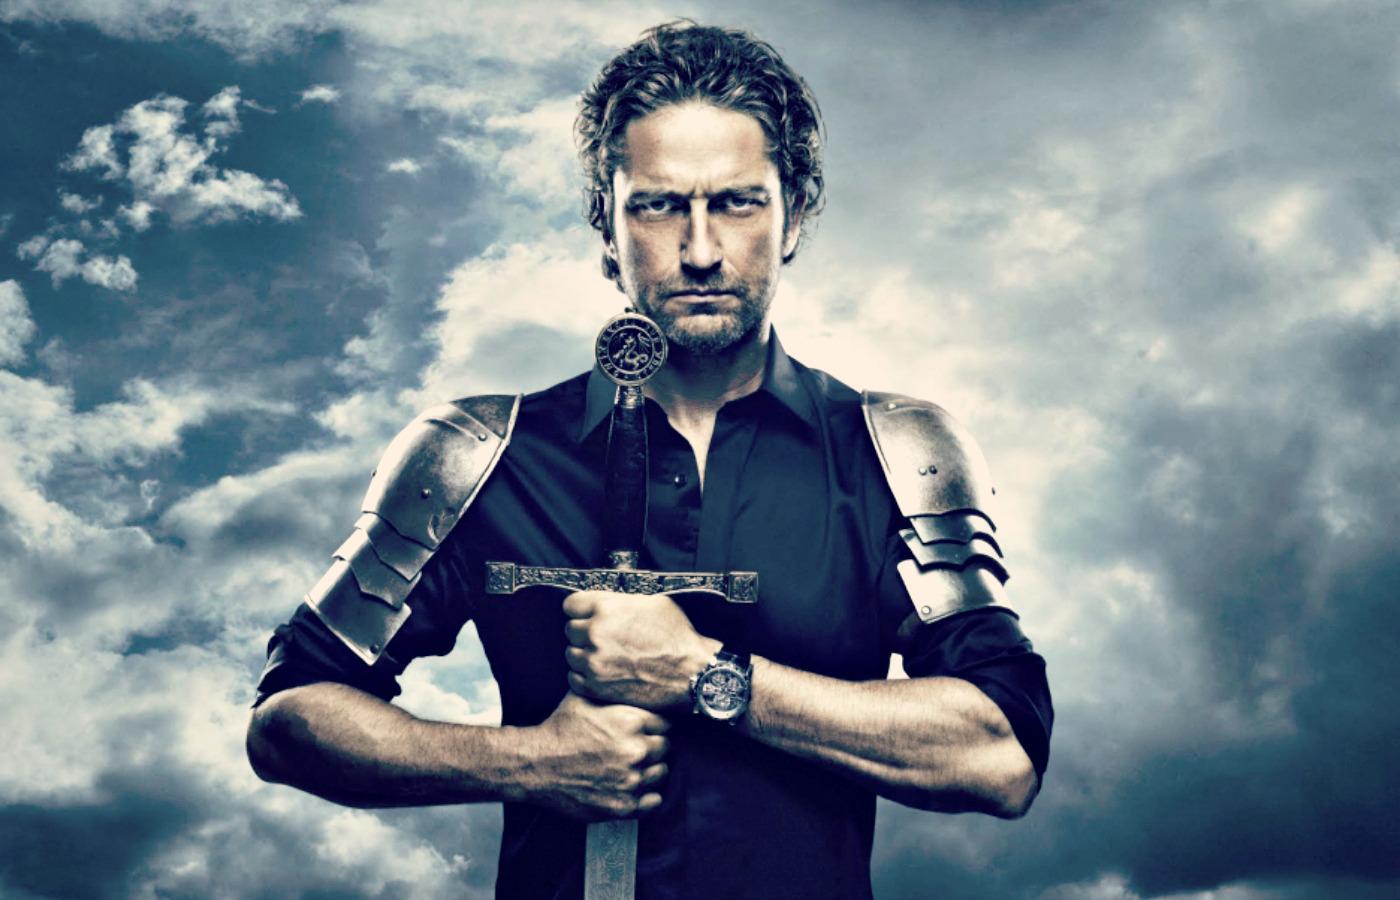 Gerard Butler High Quality And Resolution Wallpaper On